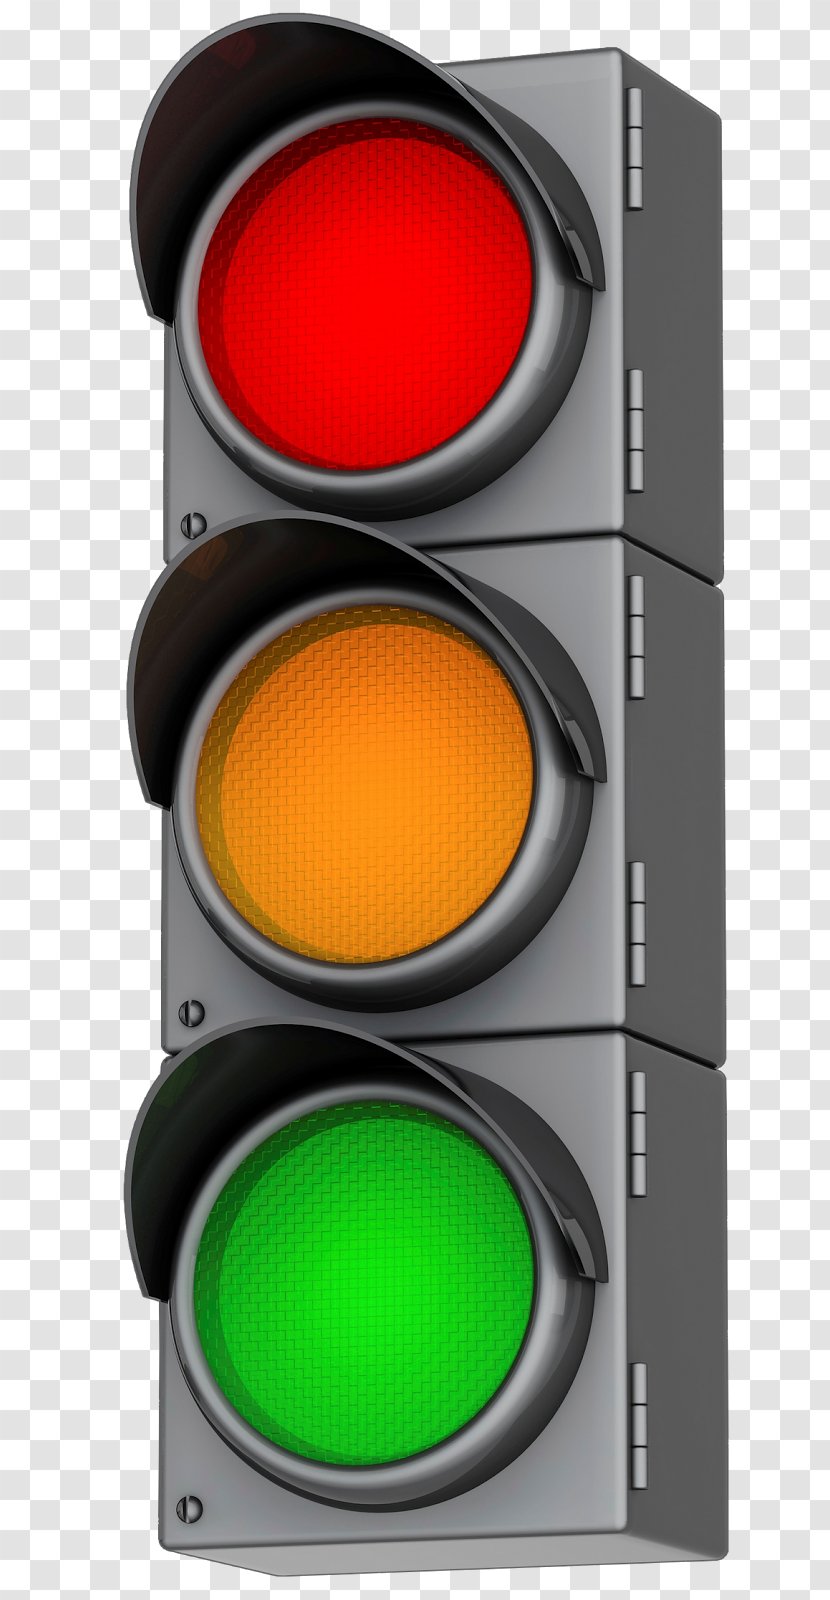 Traffic Light Clip Art - Transparency And Translucency - IT Transparent PNG